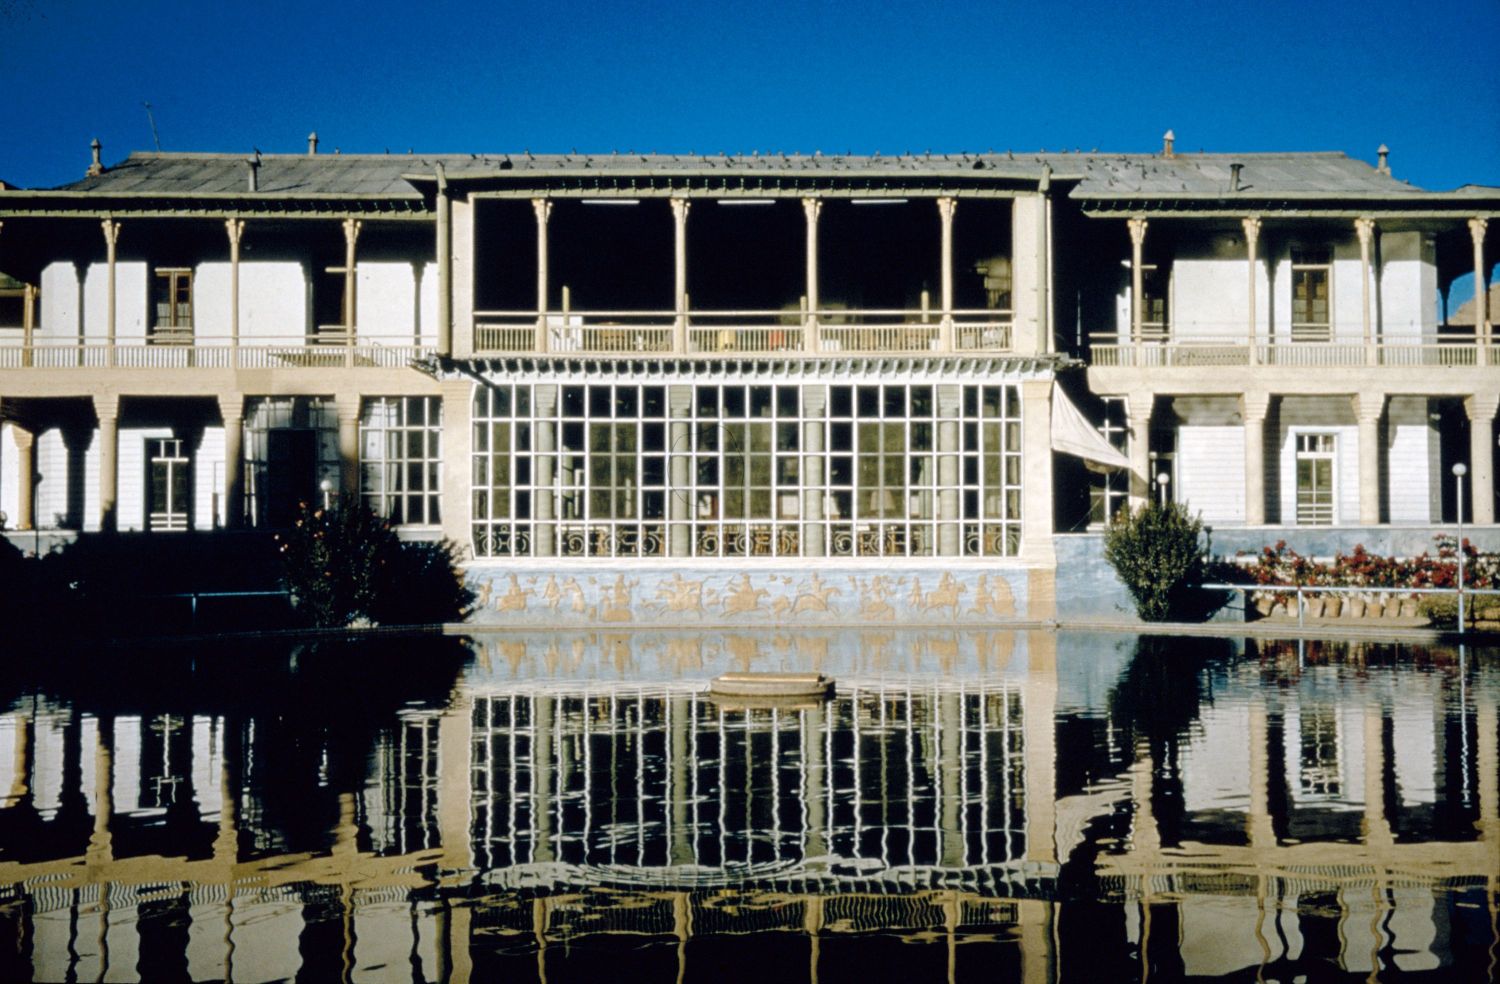 Exterior view of façade and reflection pool.